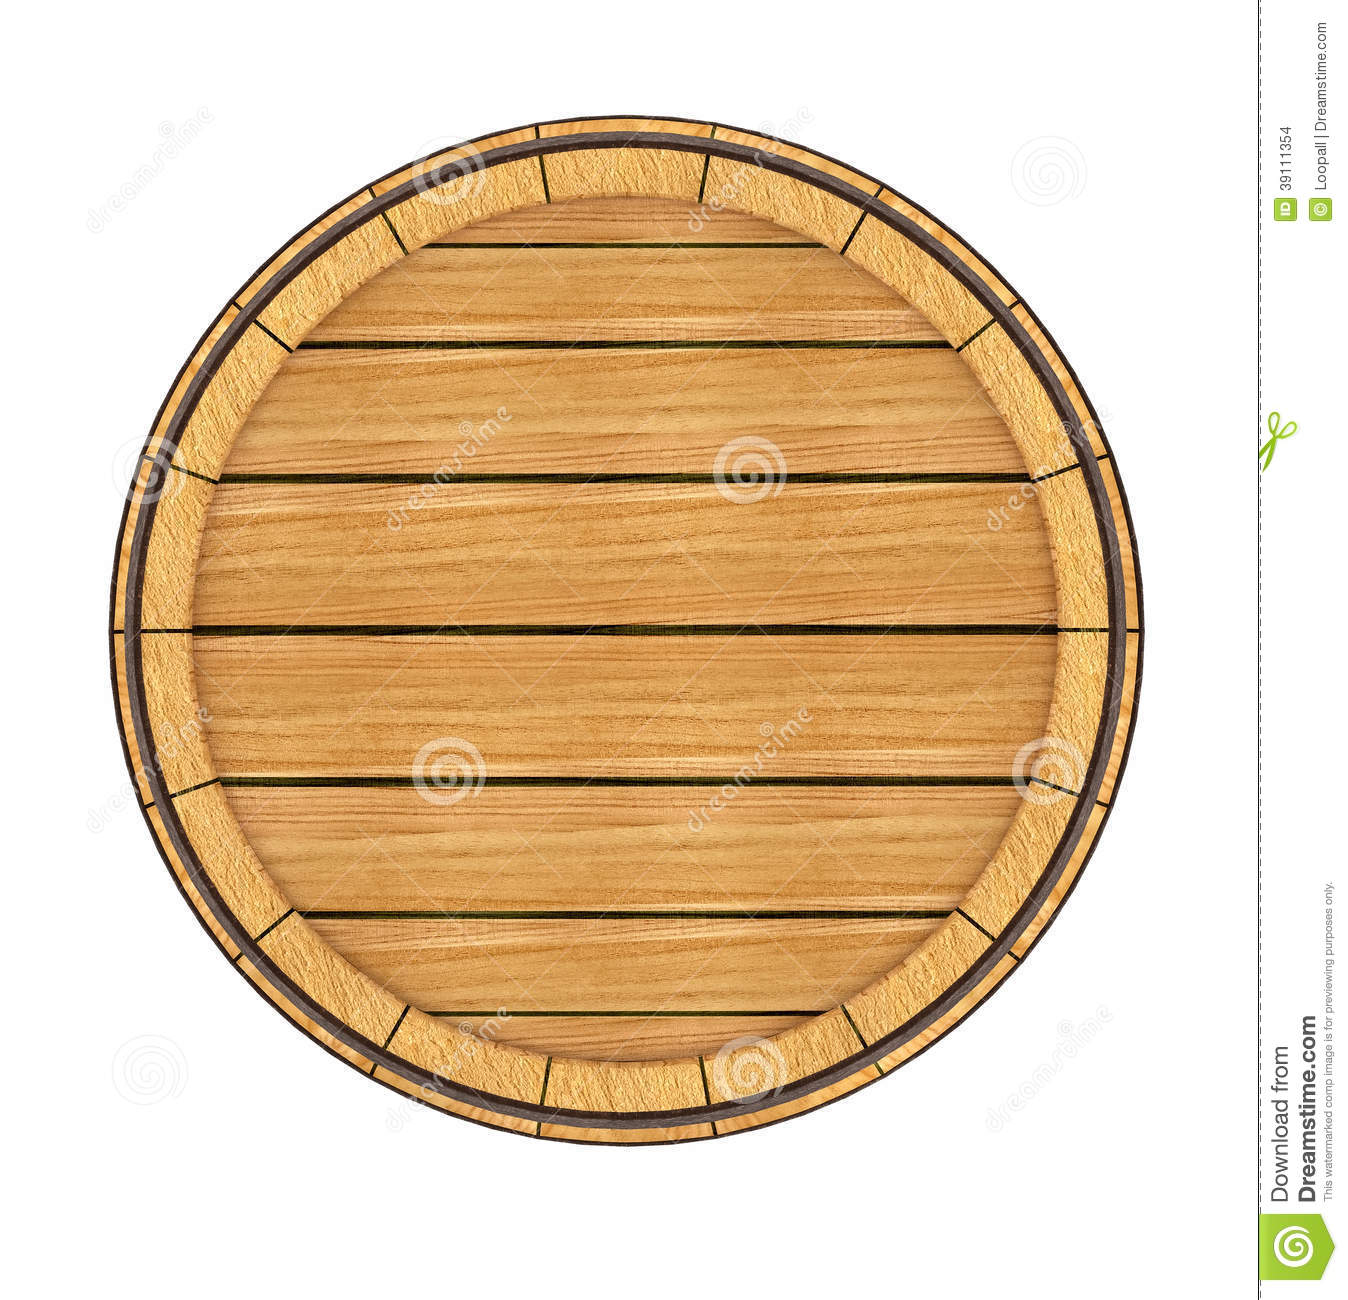 Wooden Barrel Top View  3d Rendered Illustration  On White Background